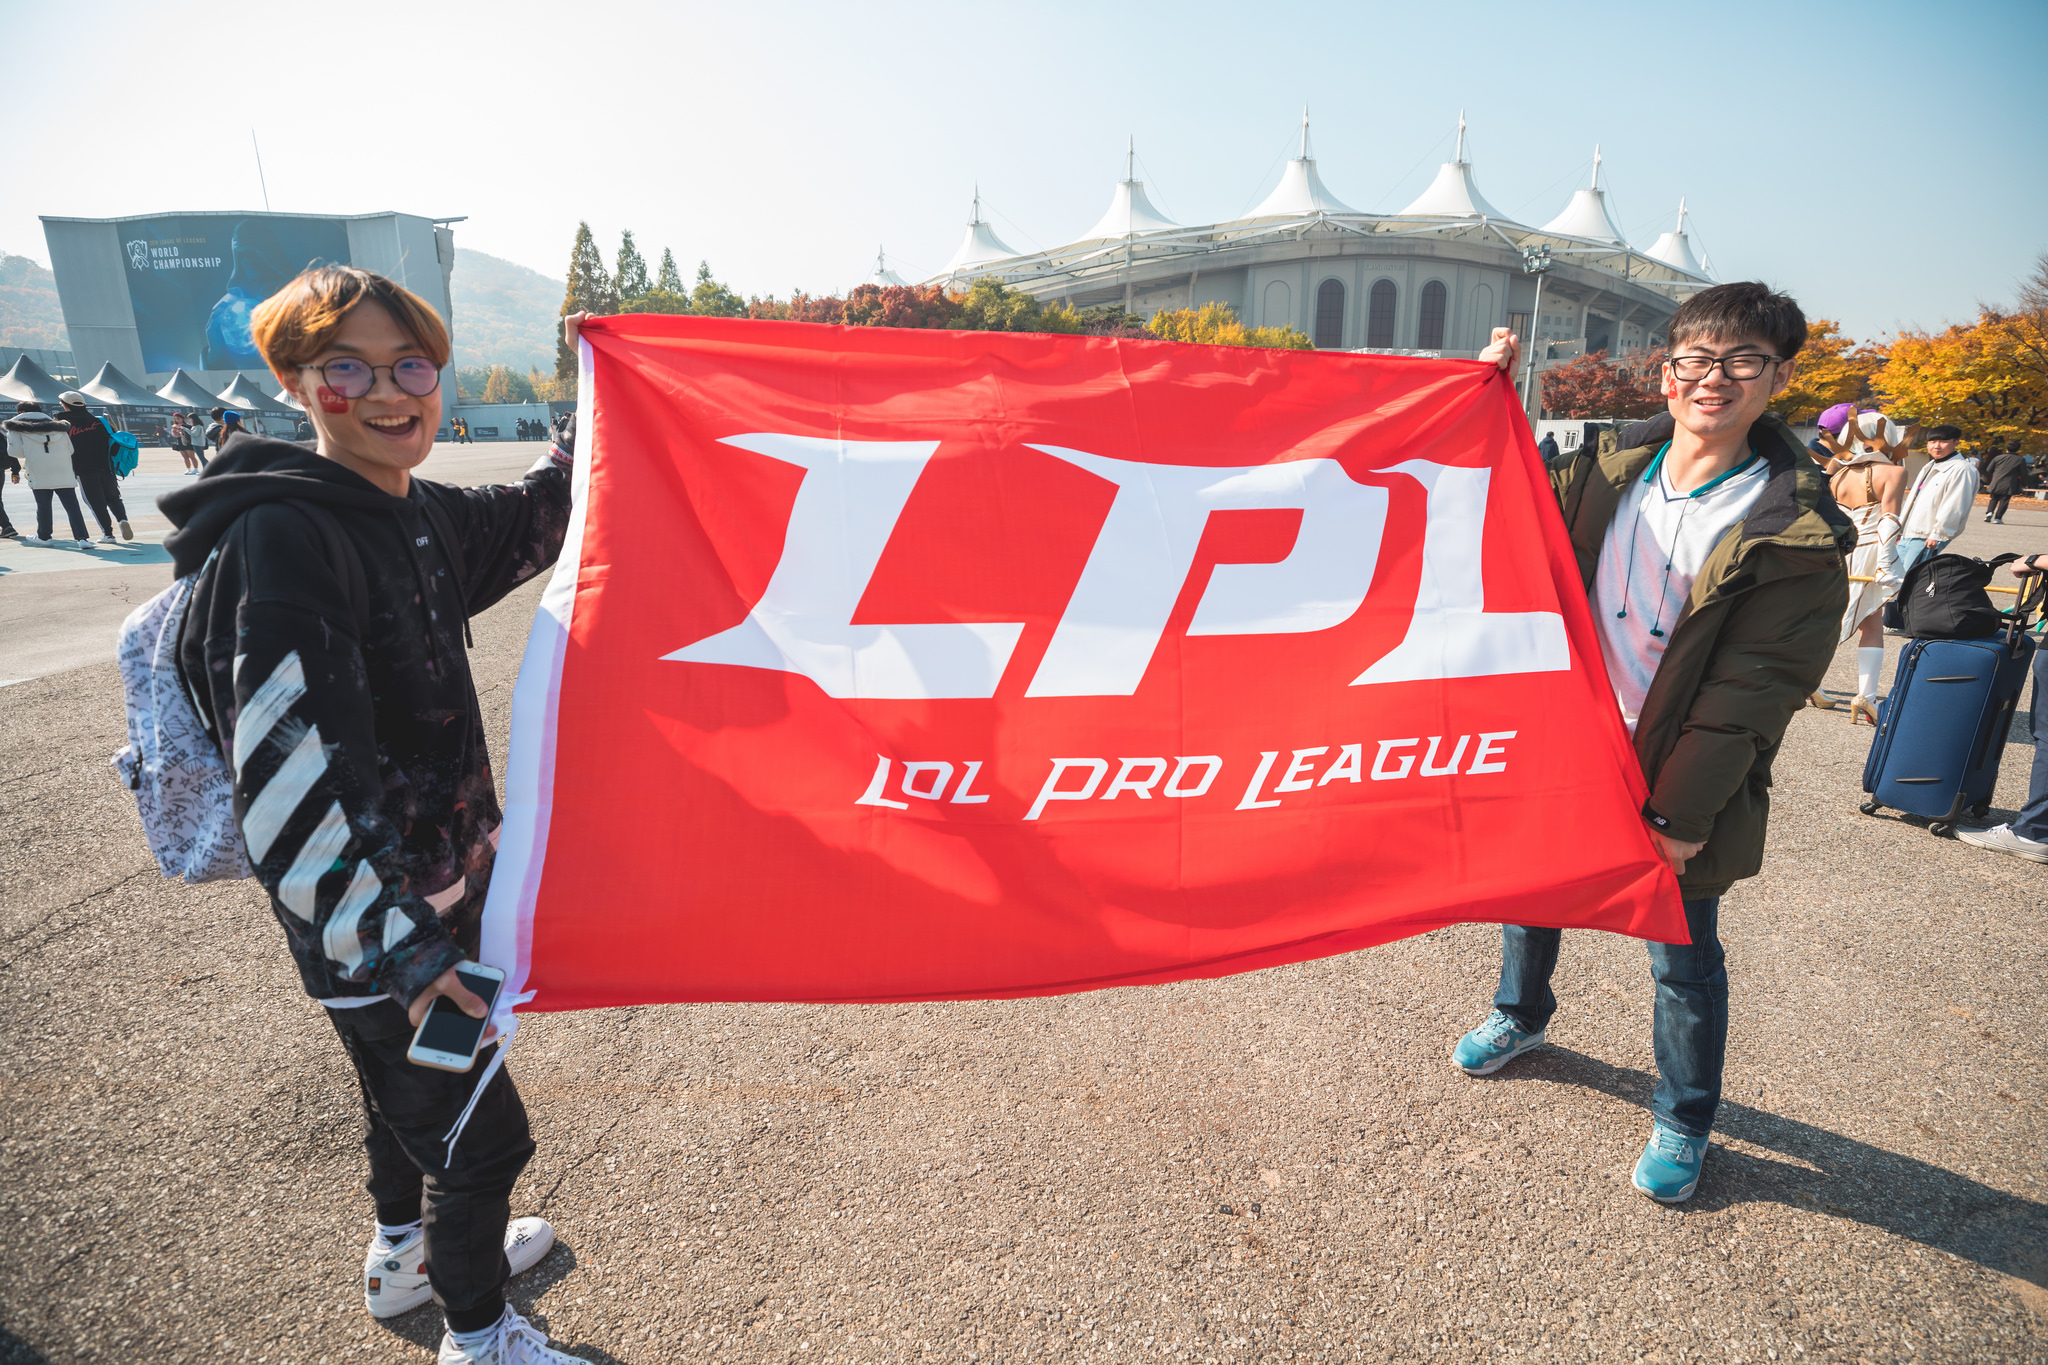 Suning Finished The First Week Of LPL With A Reverse Sweep In LPL’s Summer Split